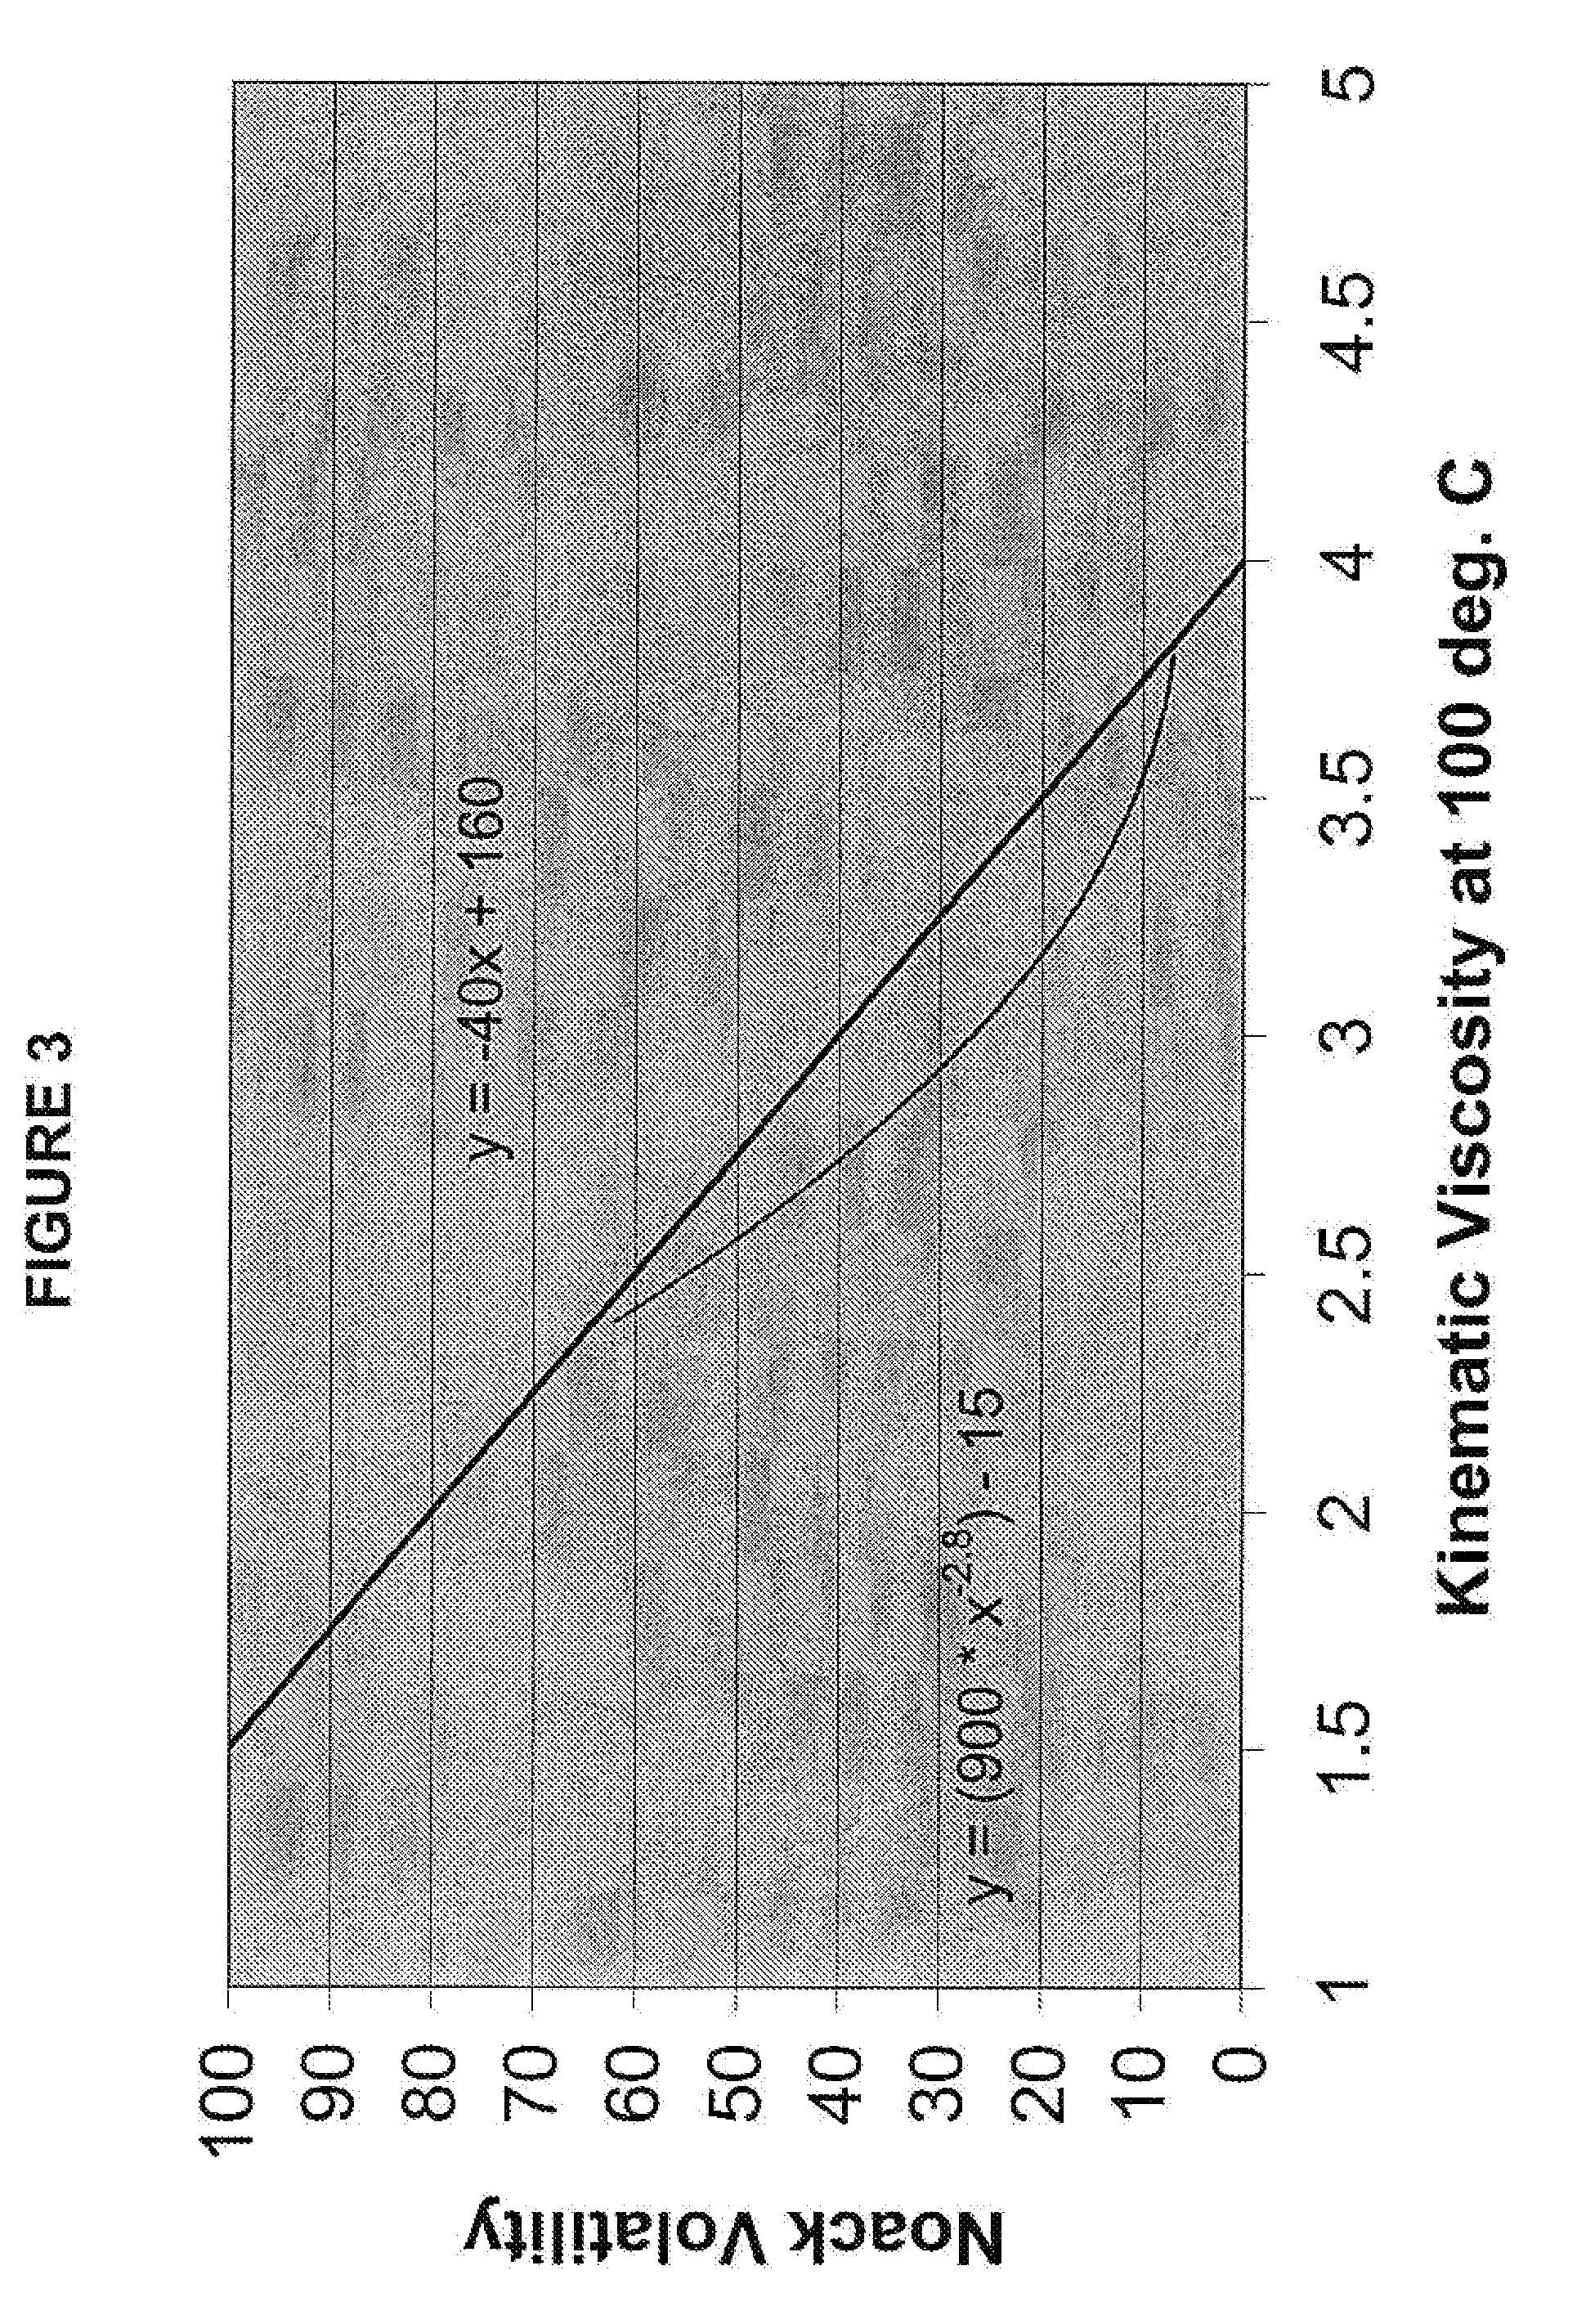 Functional fluid compositions